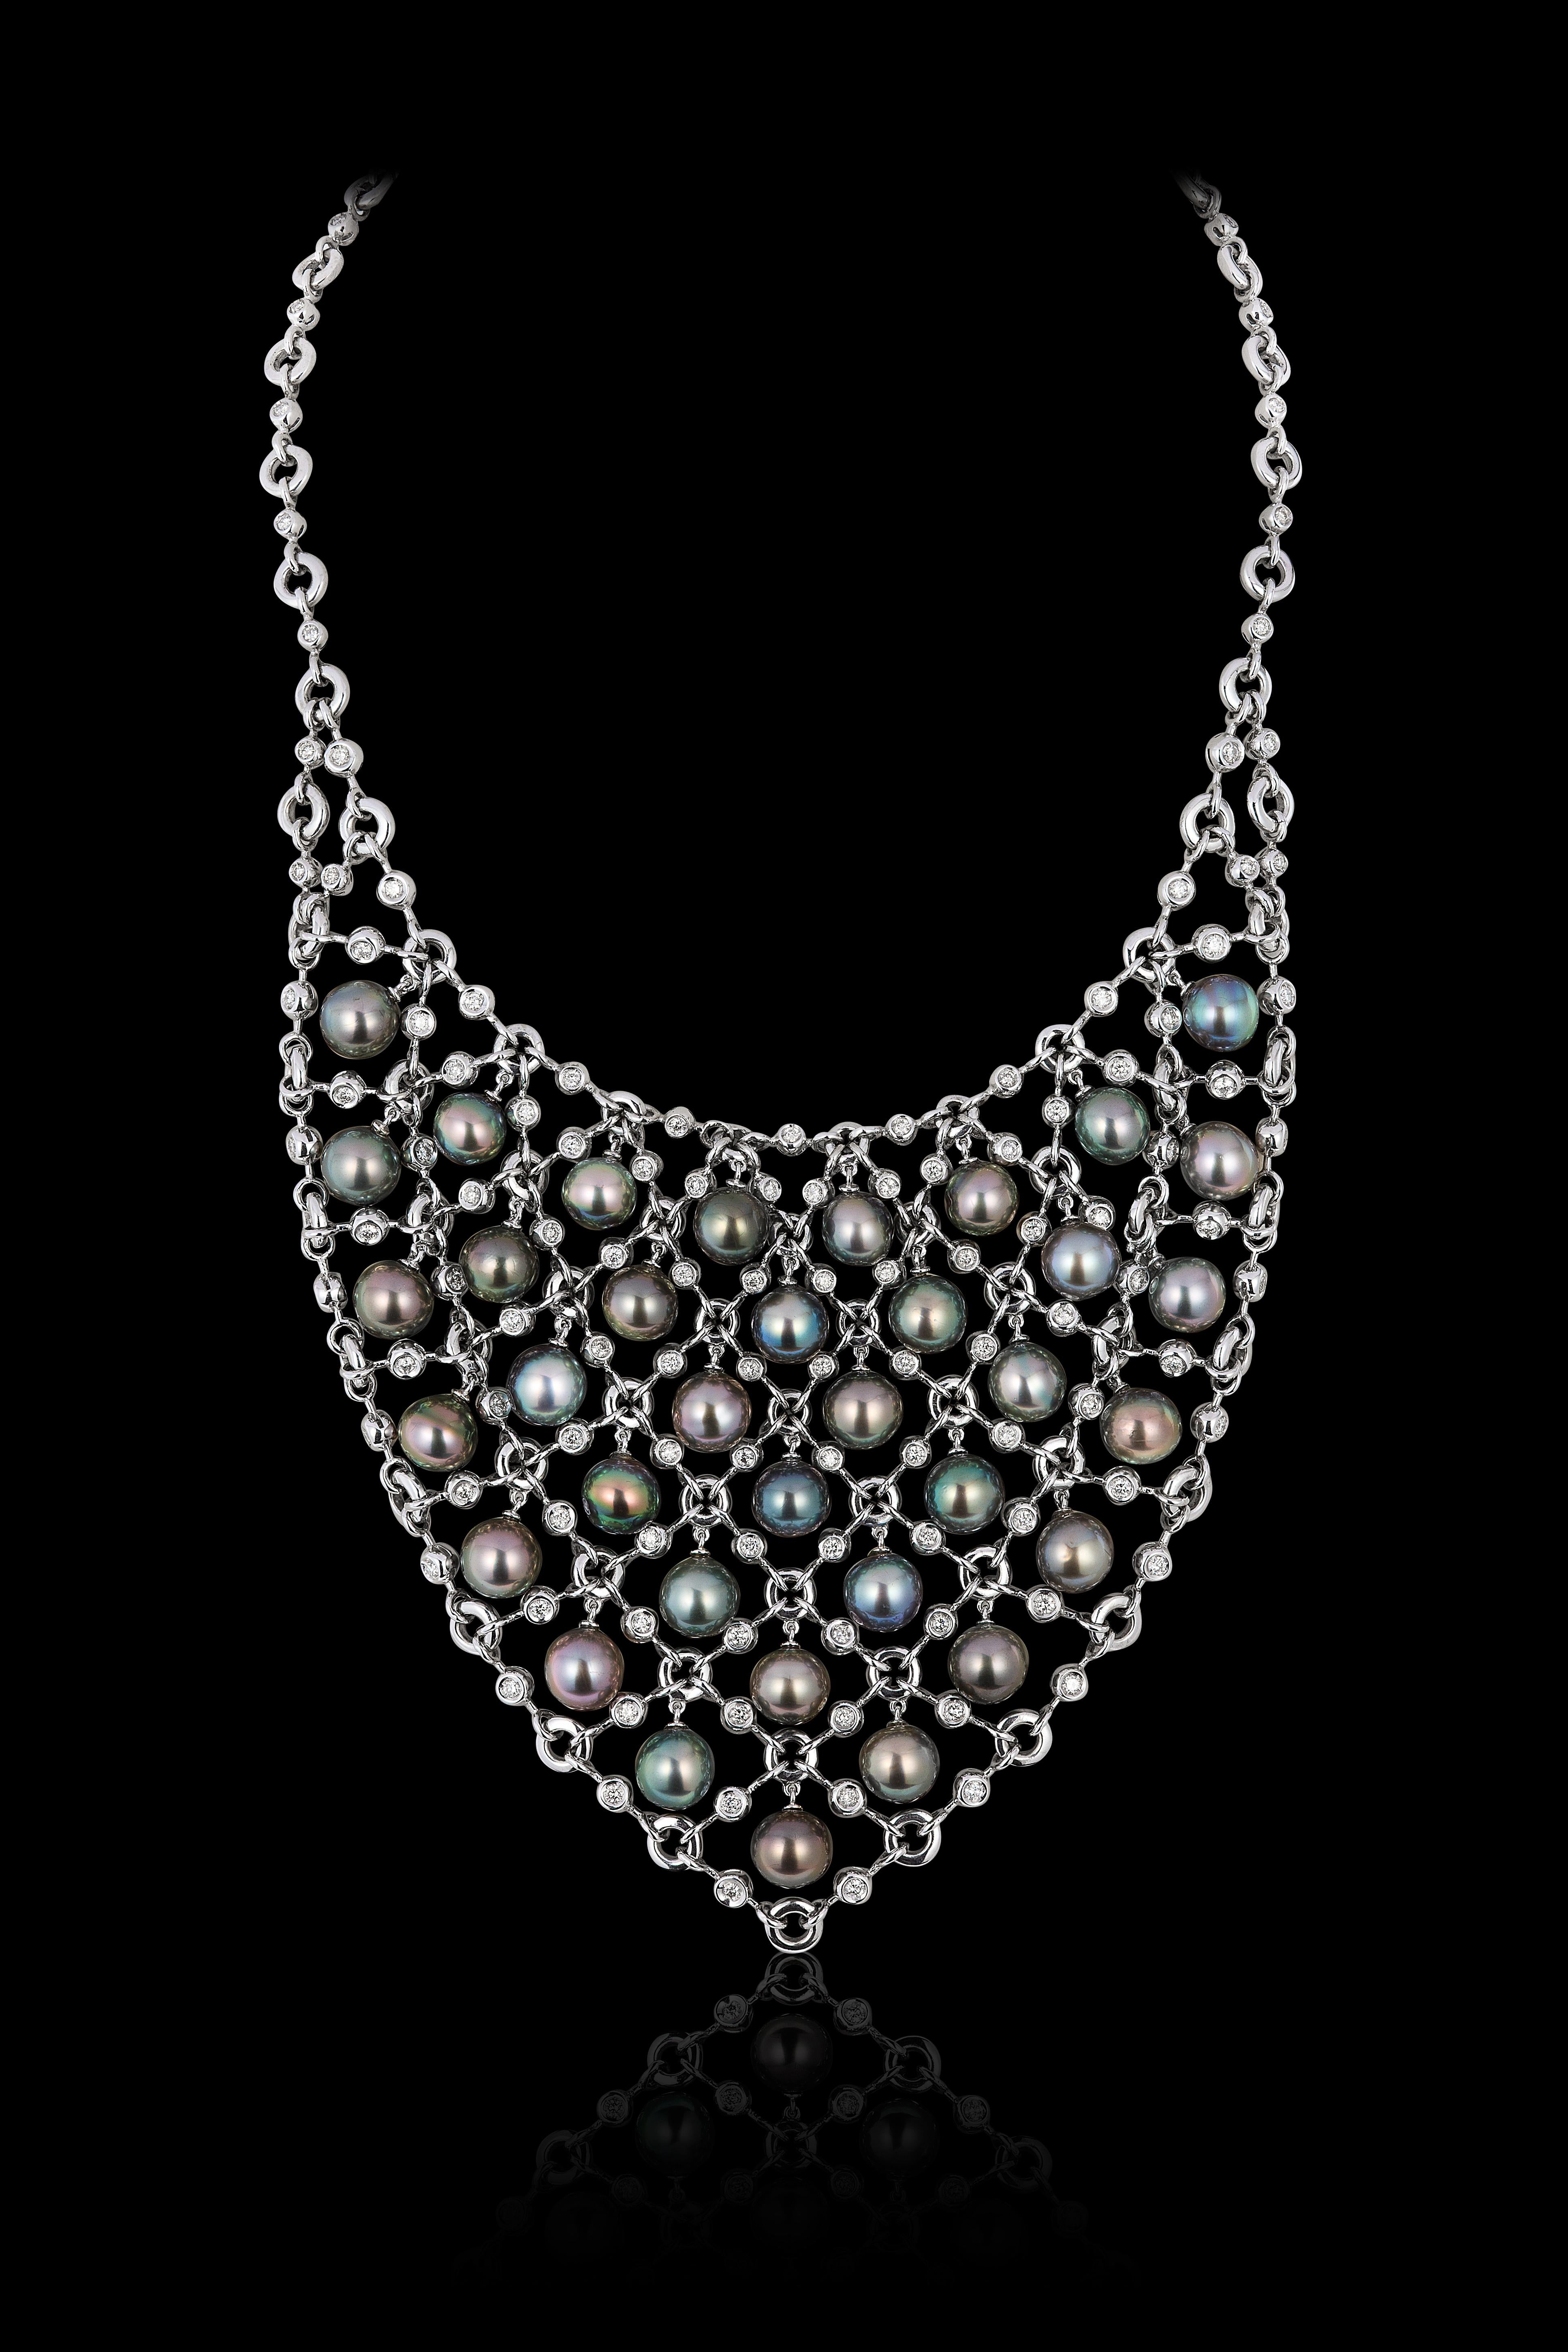 Andreoli Chainmail Bib Tahitian Pearl Diamond Necklace 18 Karat White Gold

This Andreoli necklace features

4.12 carat Diamond
Tahitian Pearls
142 grams 18 Karat White Gold

Made in Italy